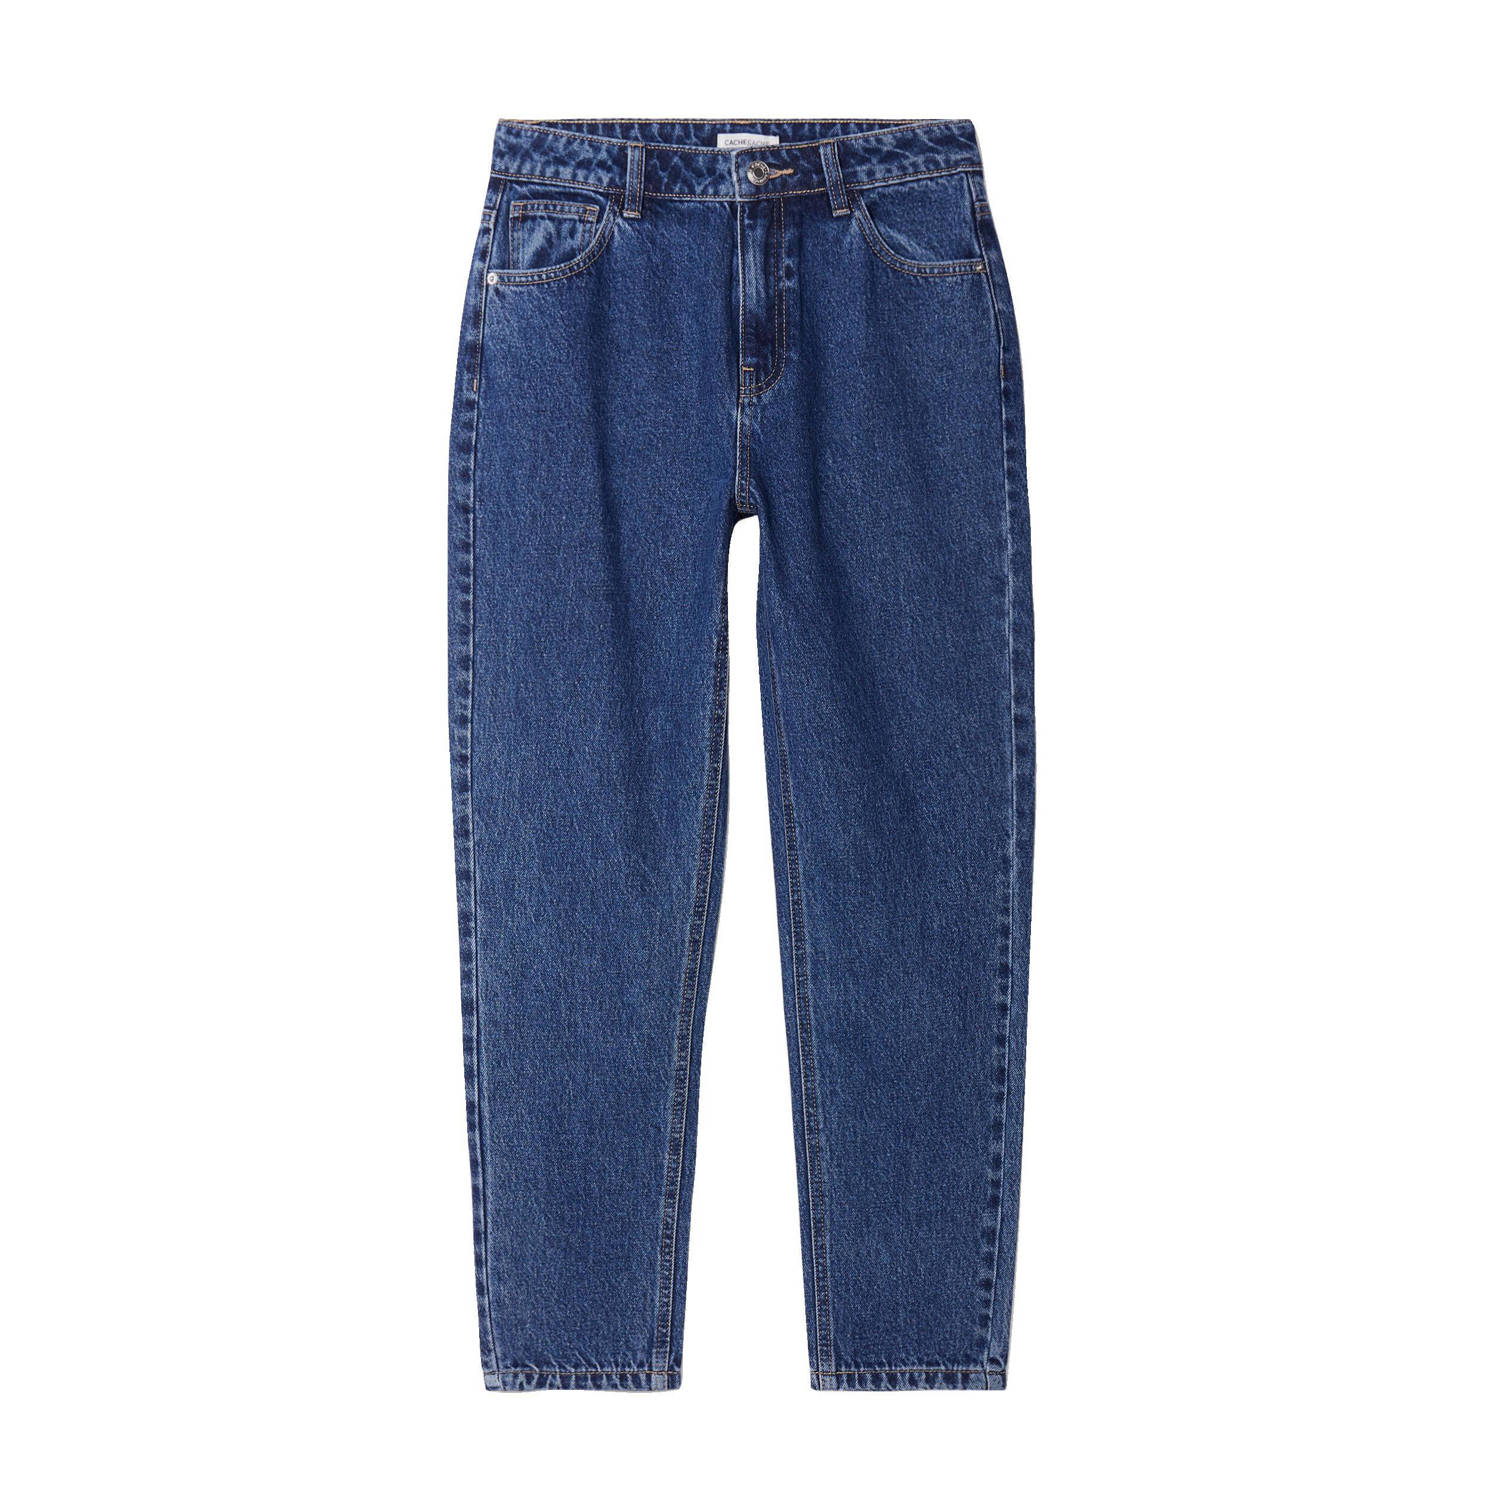 Cache cropped high waist mom jeans stonewashed blue